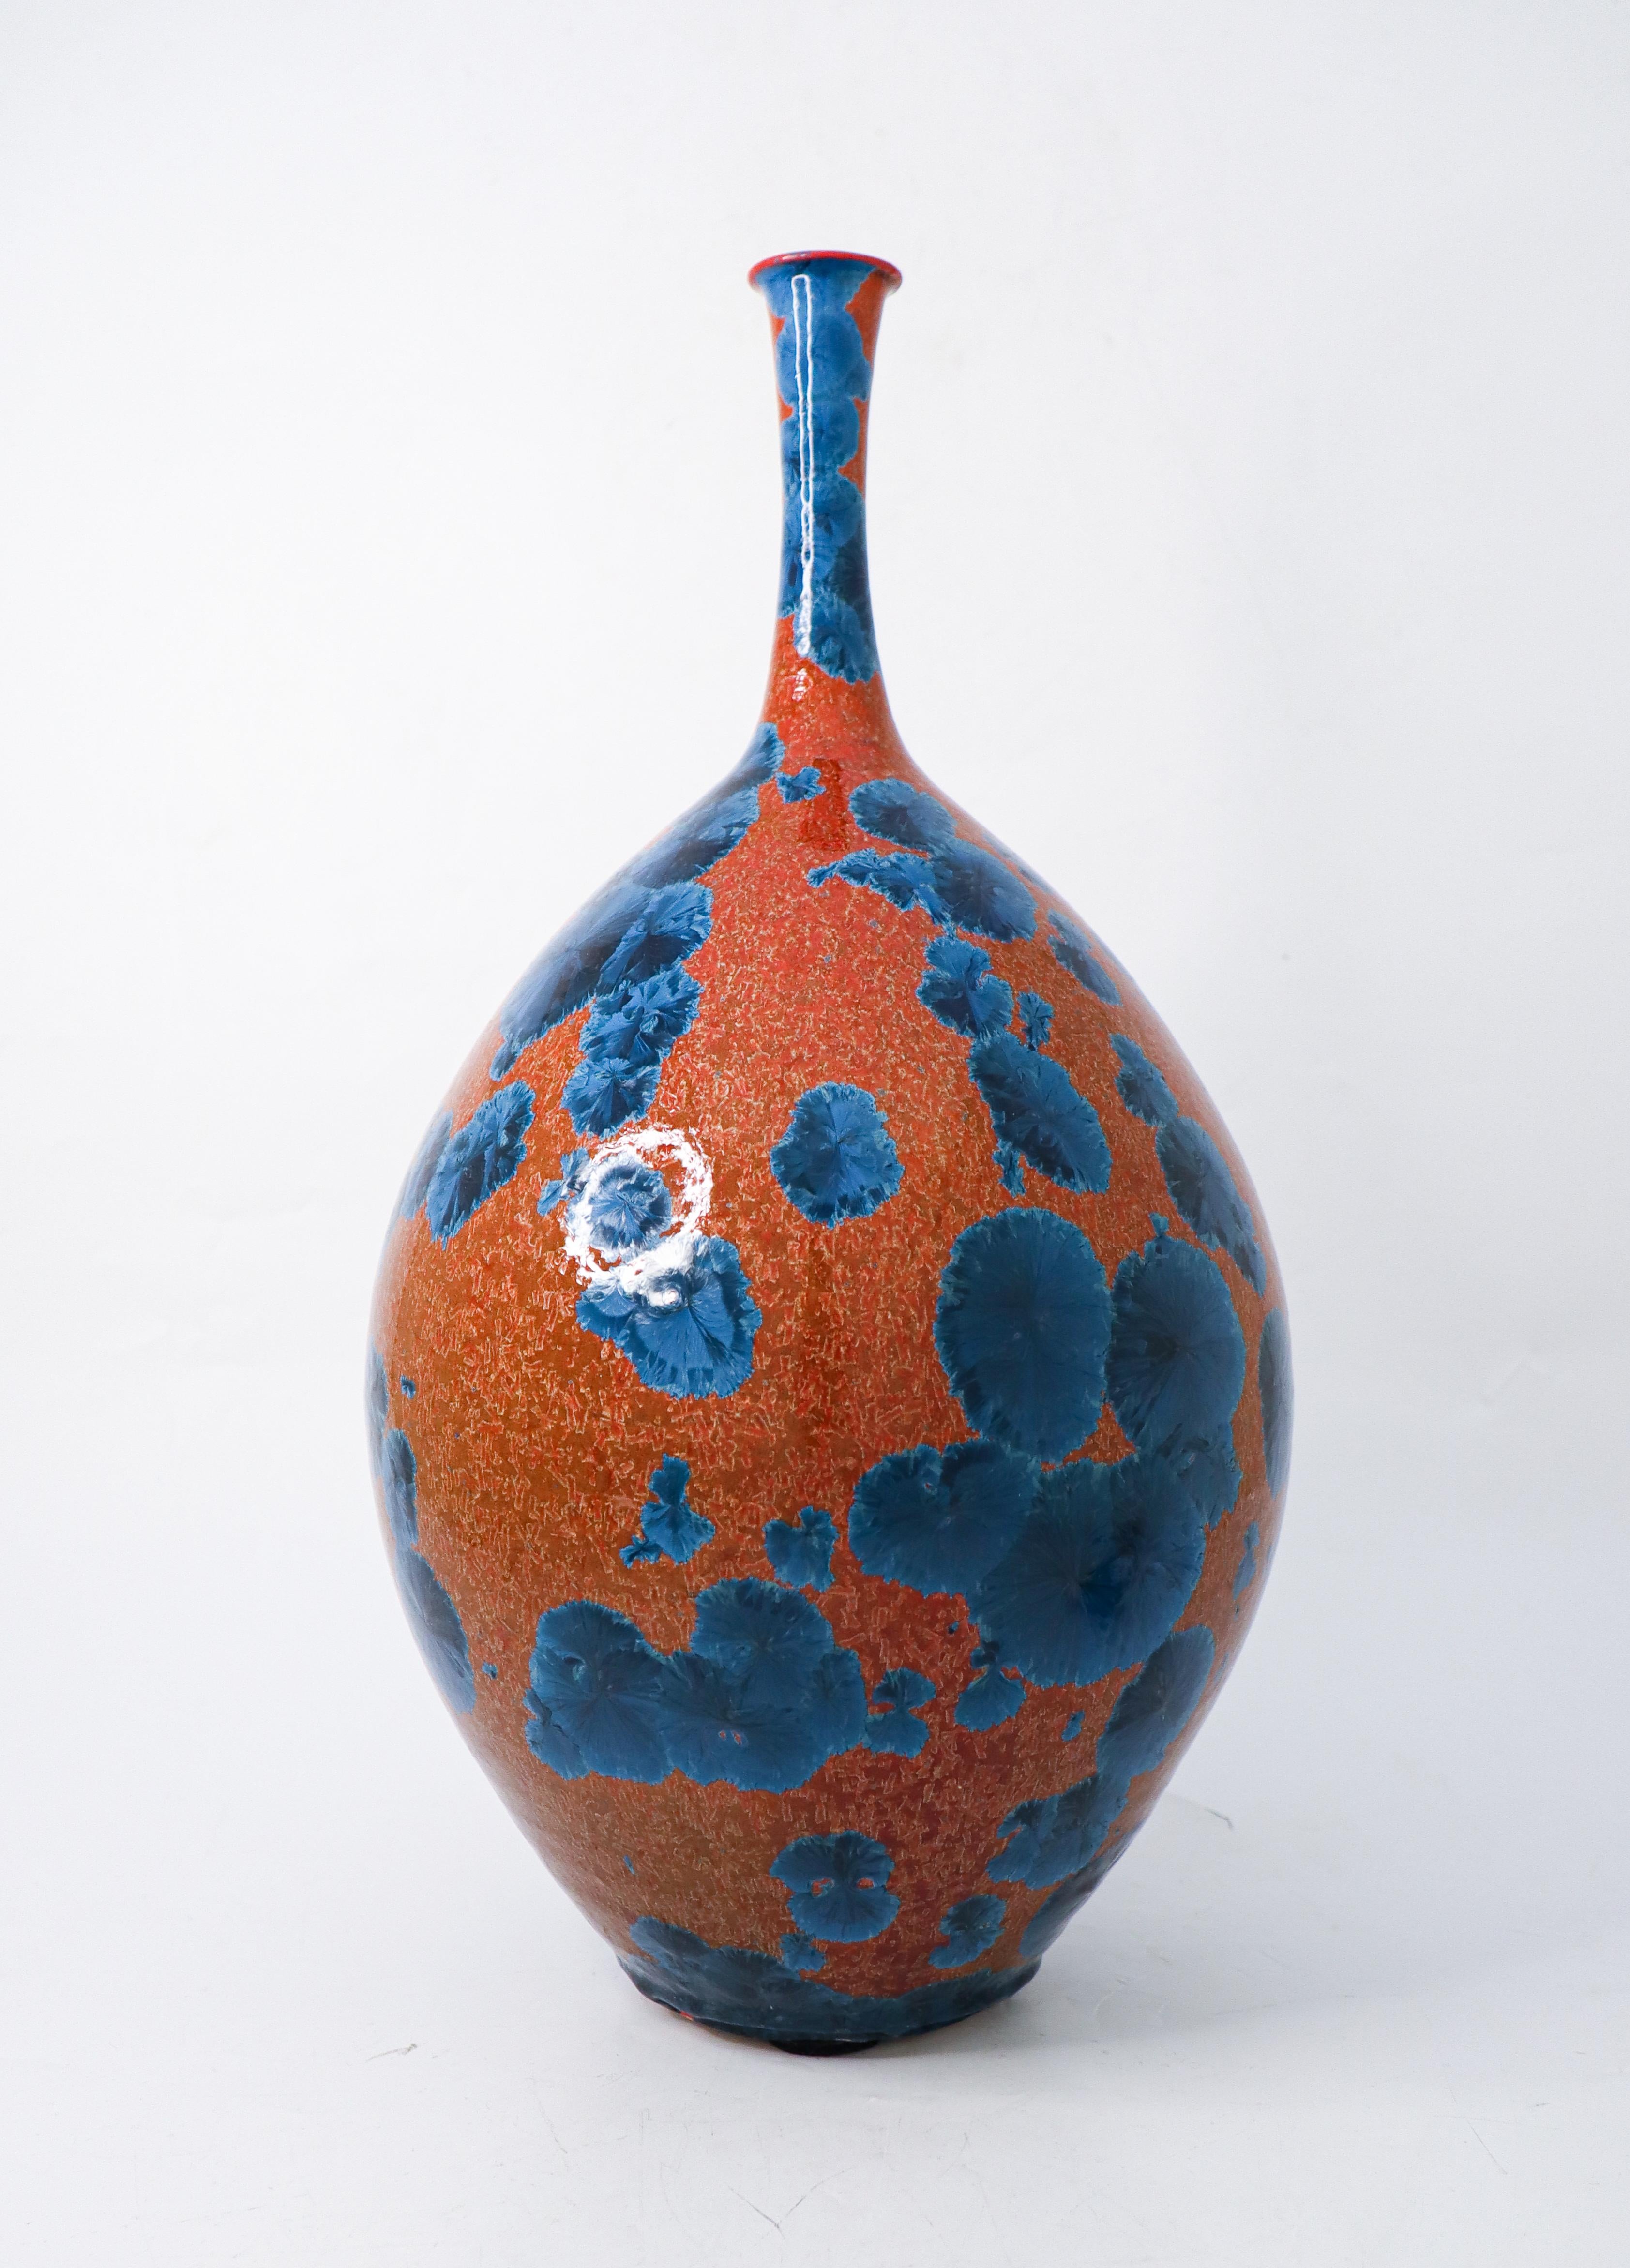 A unique vase in a red / brown color with a blue crystalline glaze created by the contemporary Swedish artist Isak Isaksson in his own studio. The vase is 44 cm (17.6